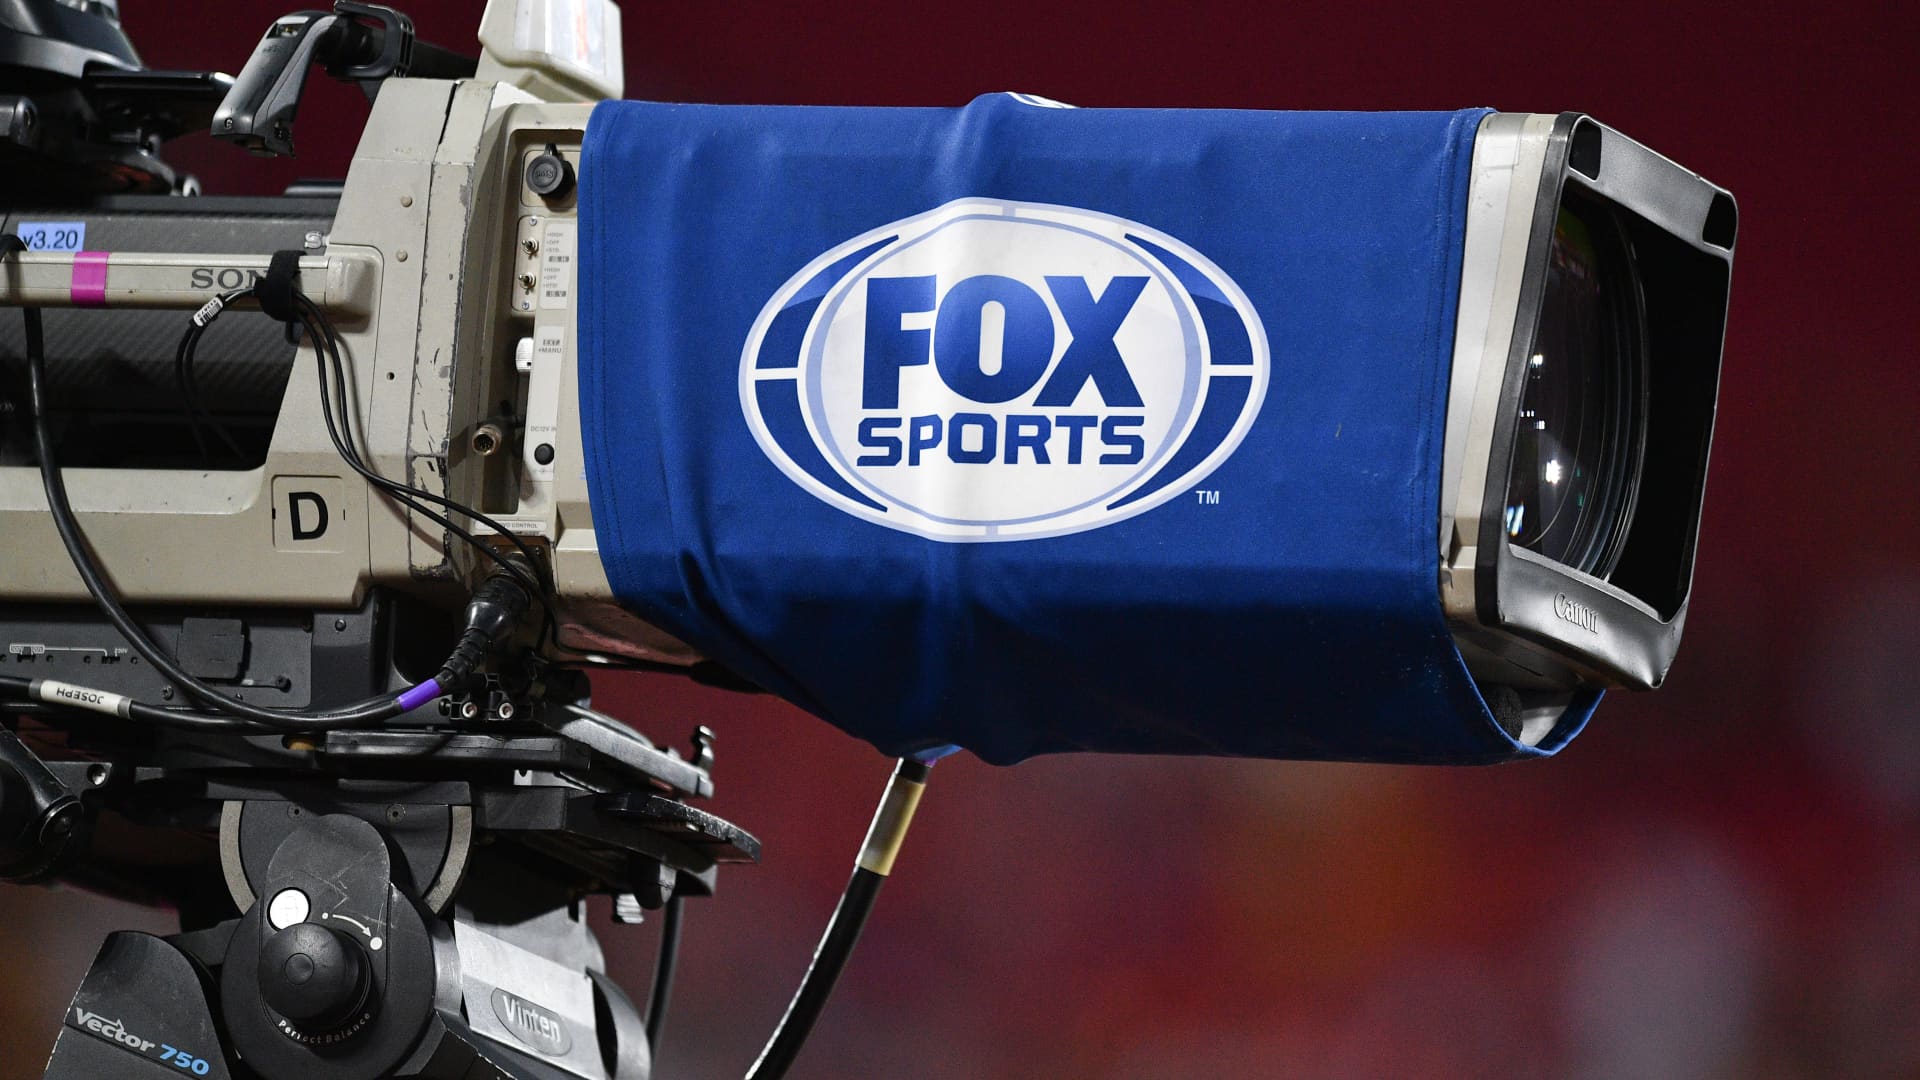 Fox touts sports activities programming efficiency at the same time as prices rise – जगत न्यूज